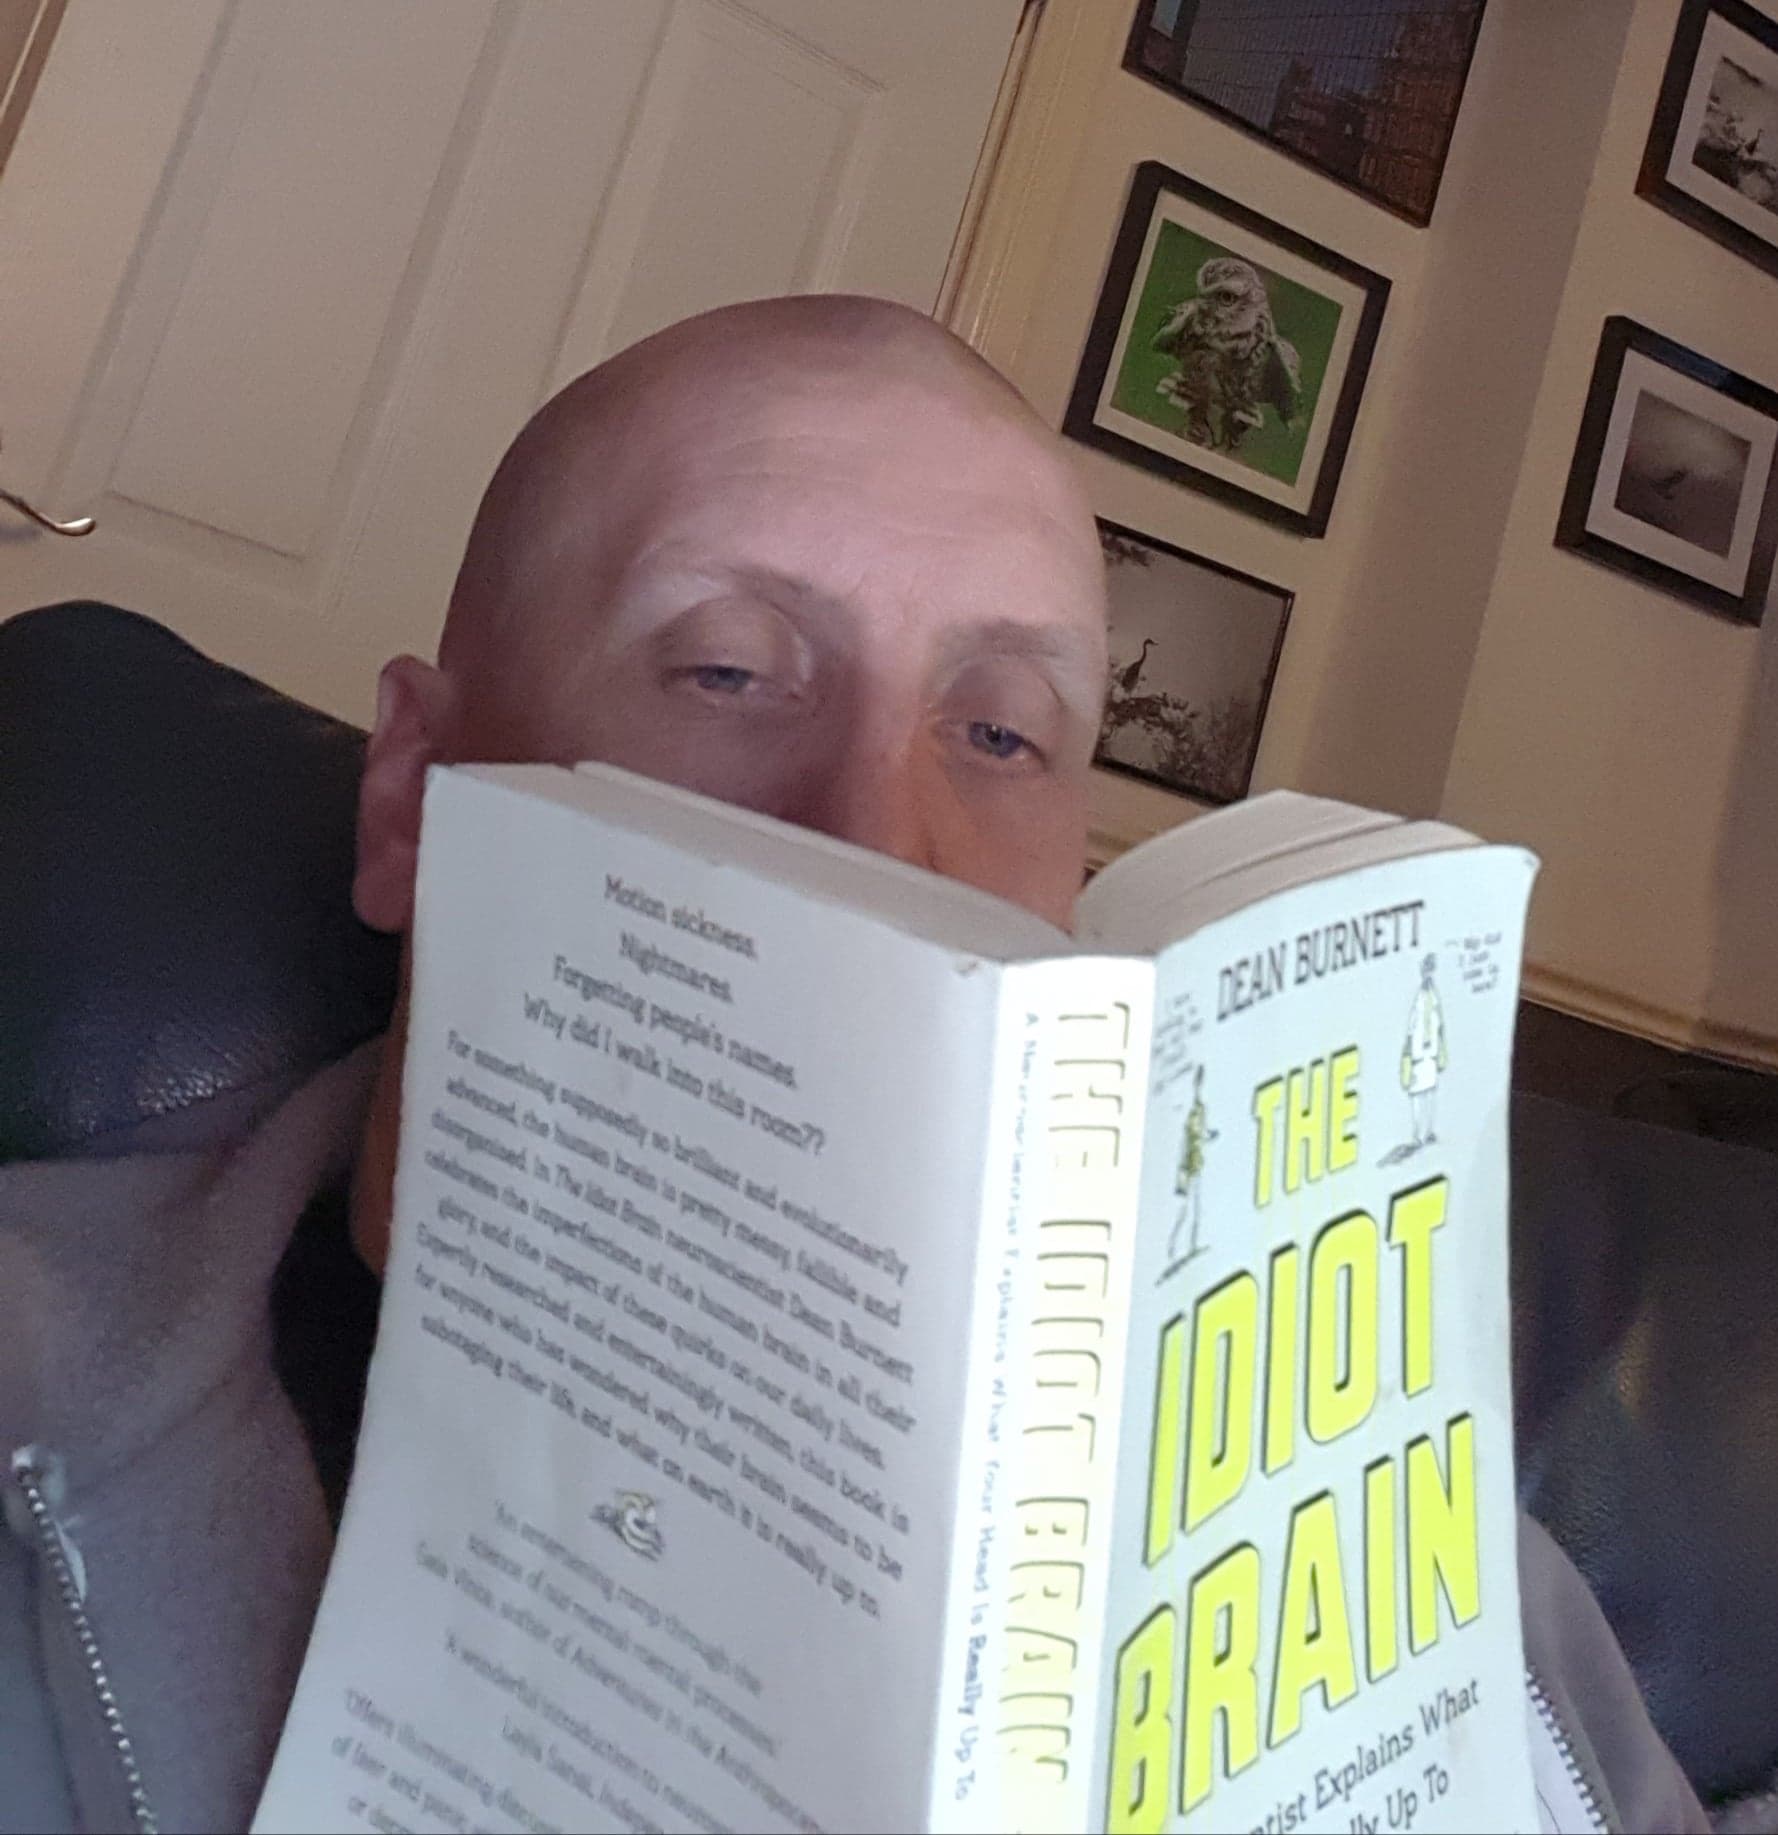 the idiot brain review